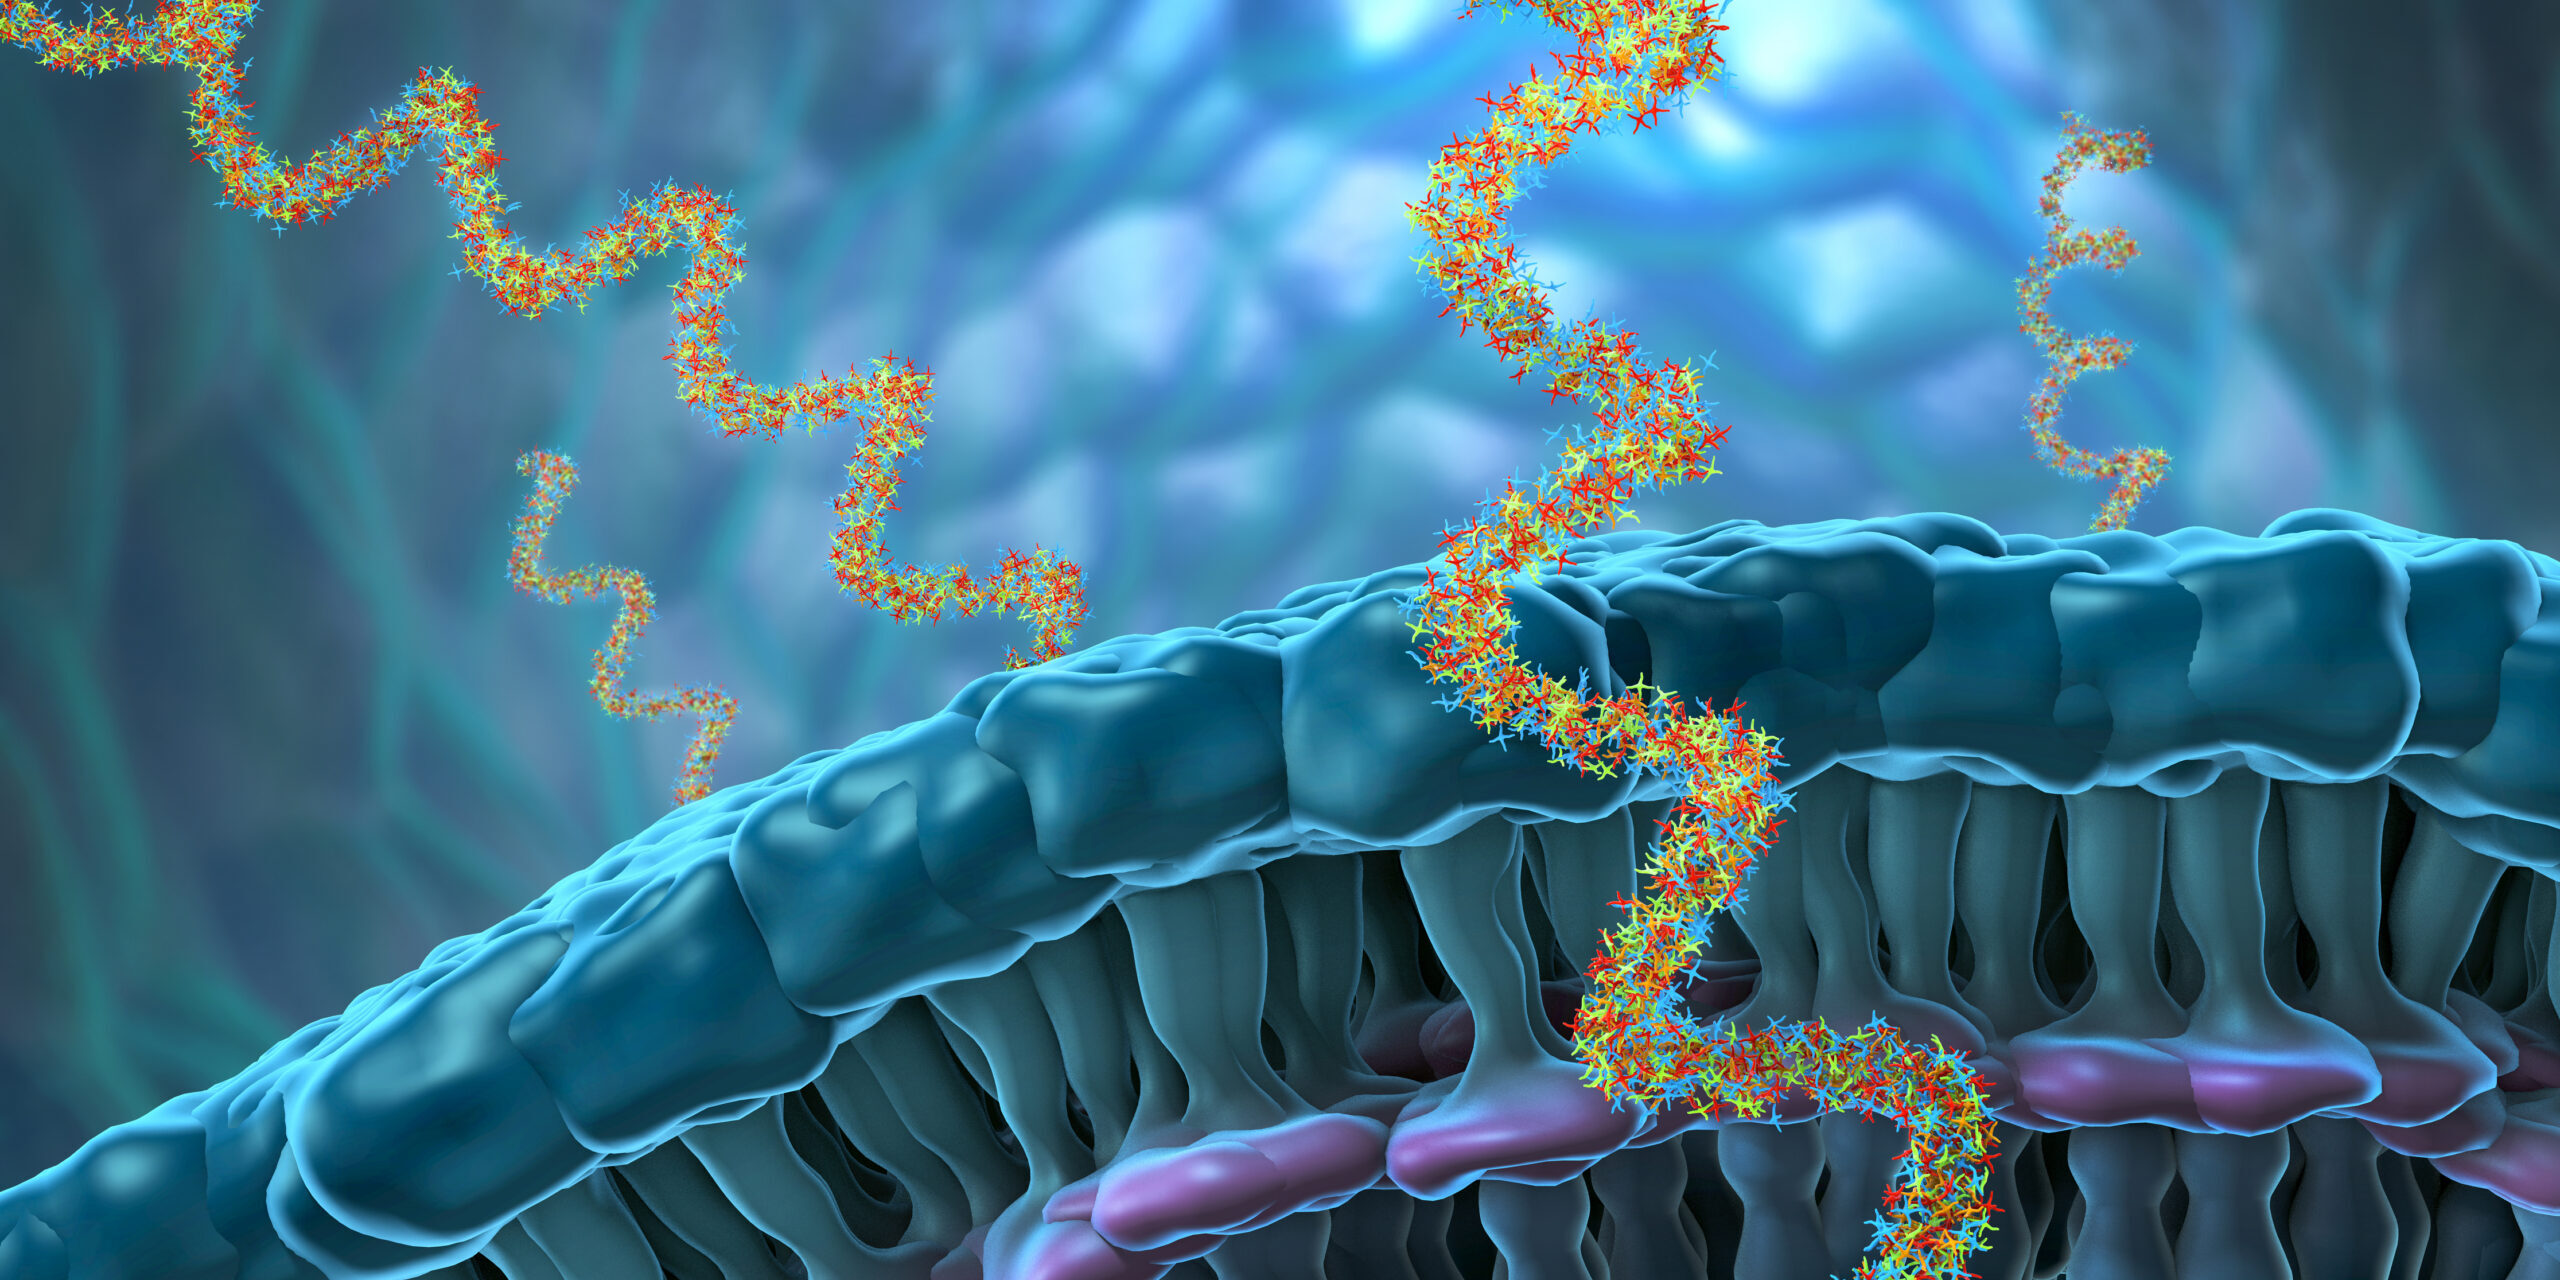 Ribonucleic acid strands consisting of nucleotides important for protein bio-synthesis - 3d illustration